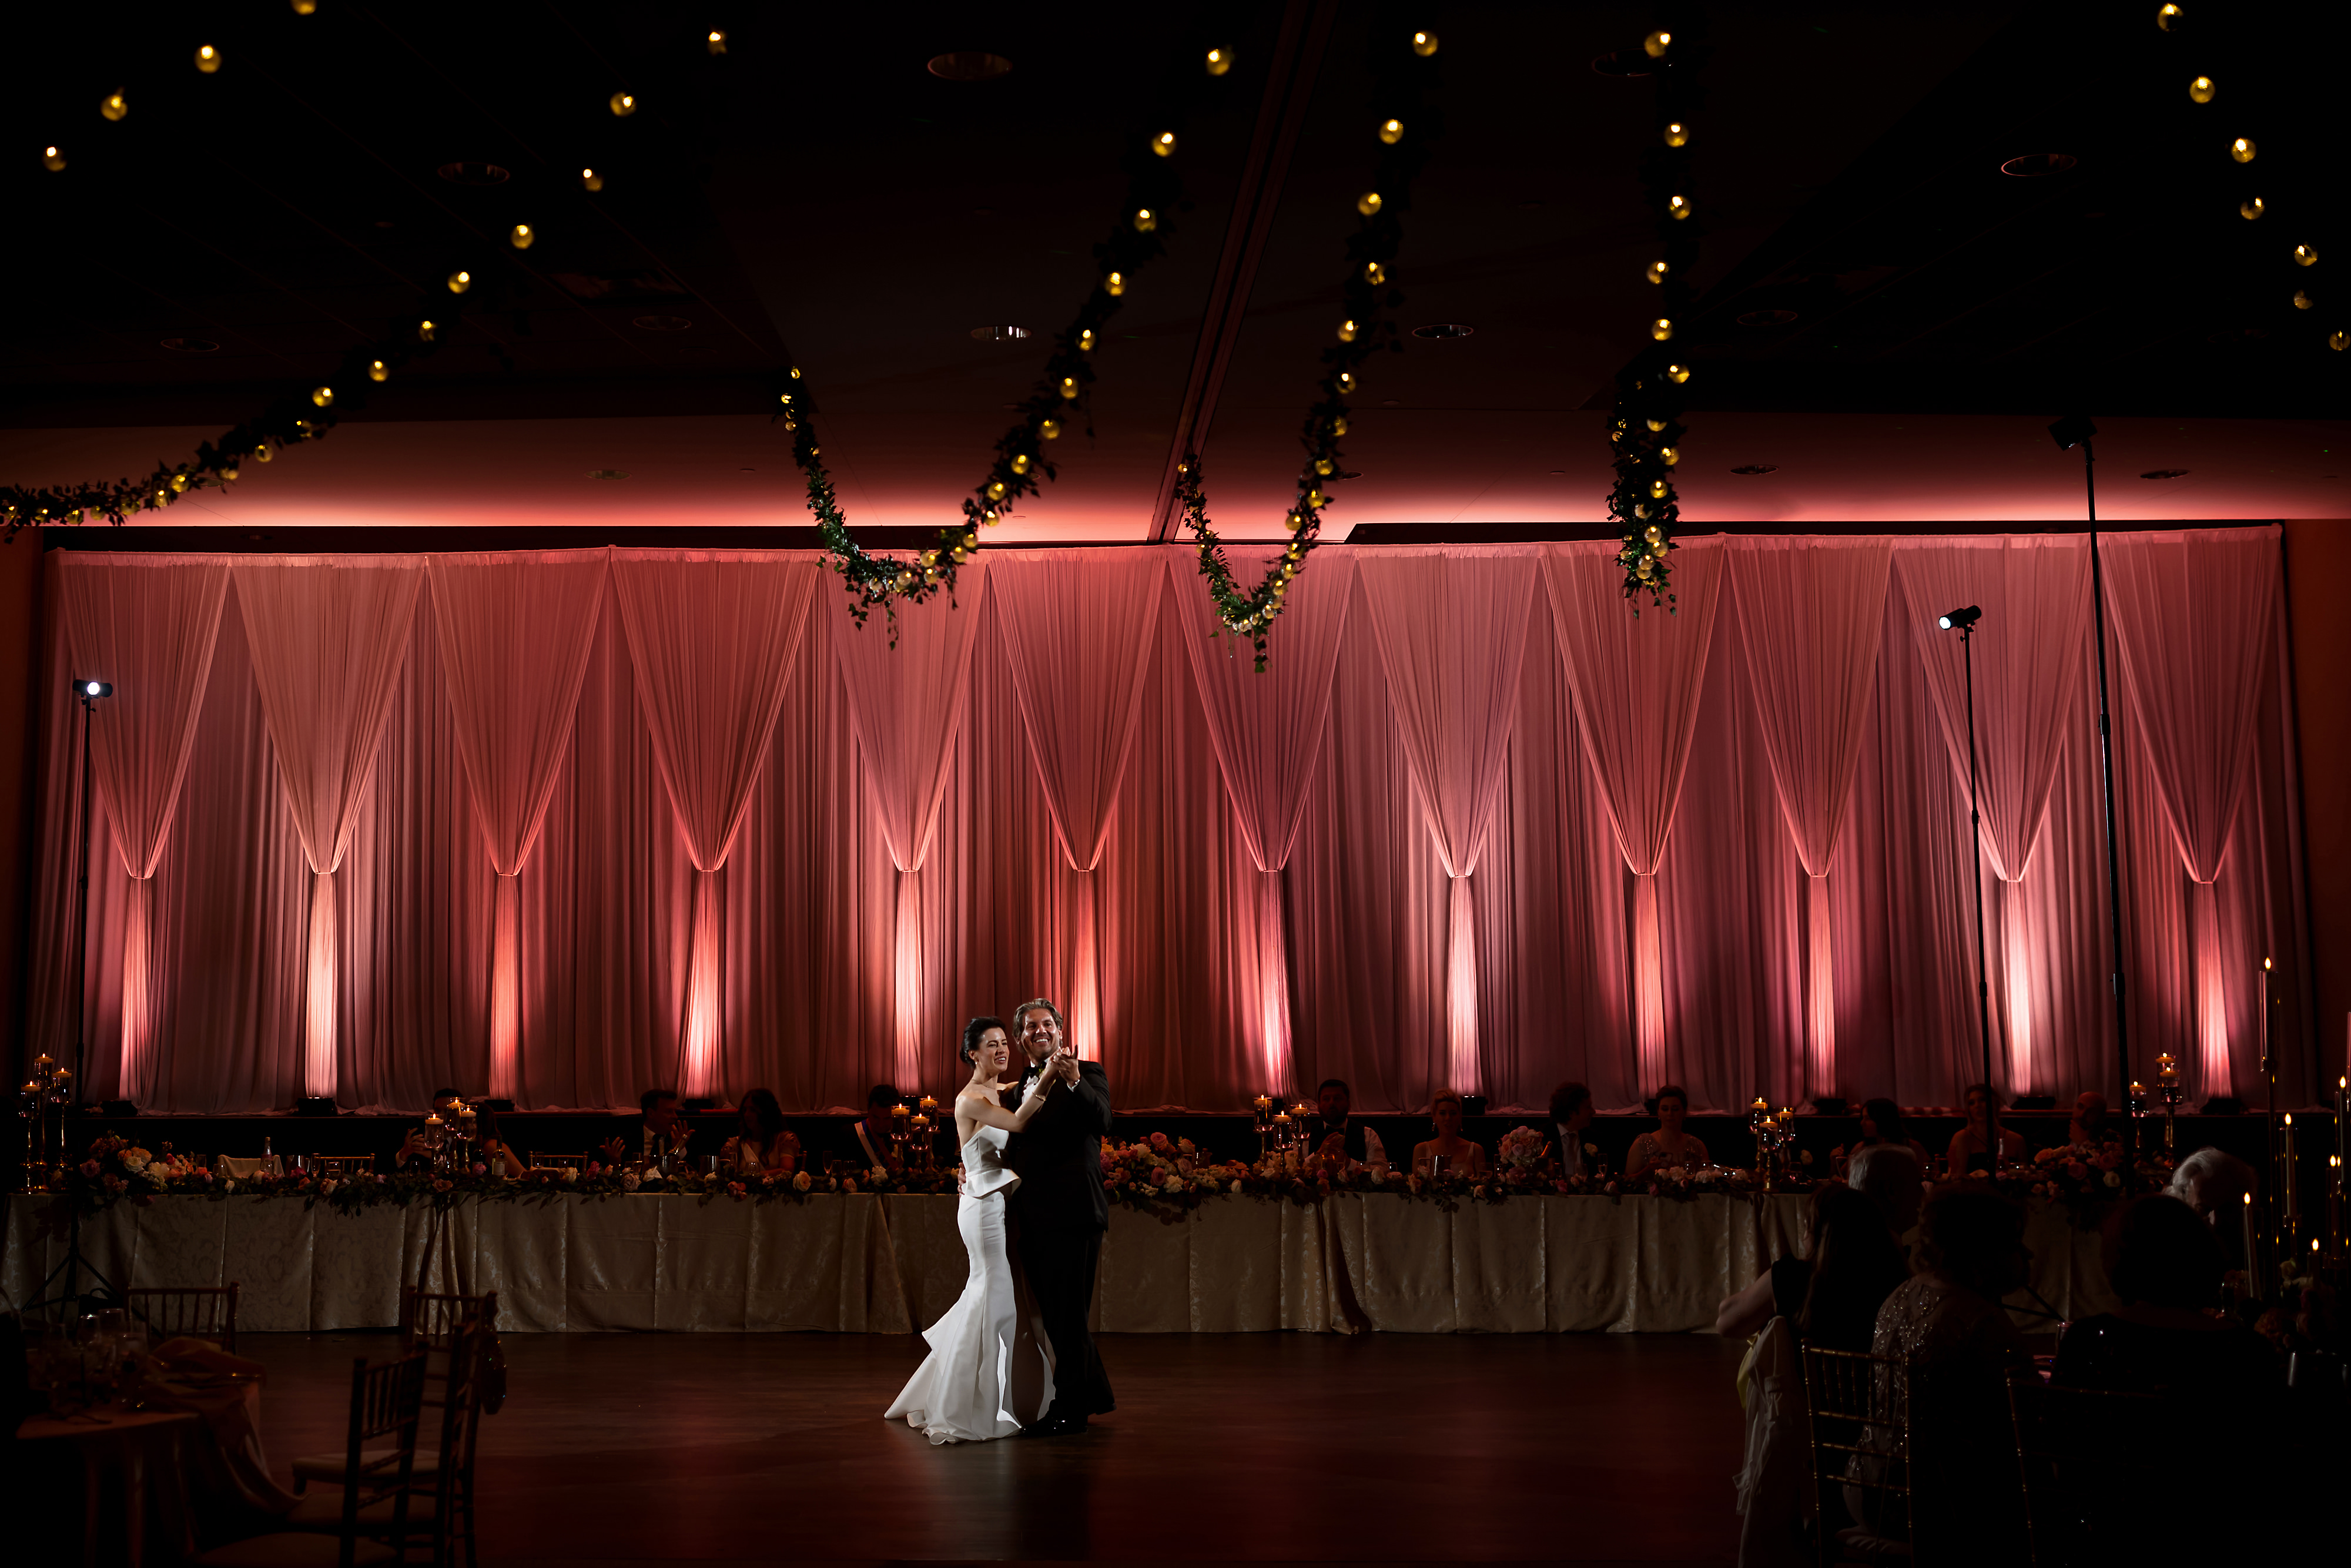 Bride and groom first dance during reception at Halls of St. George